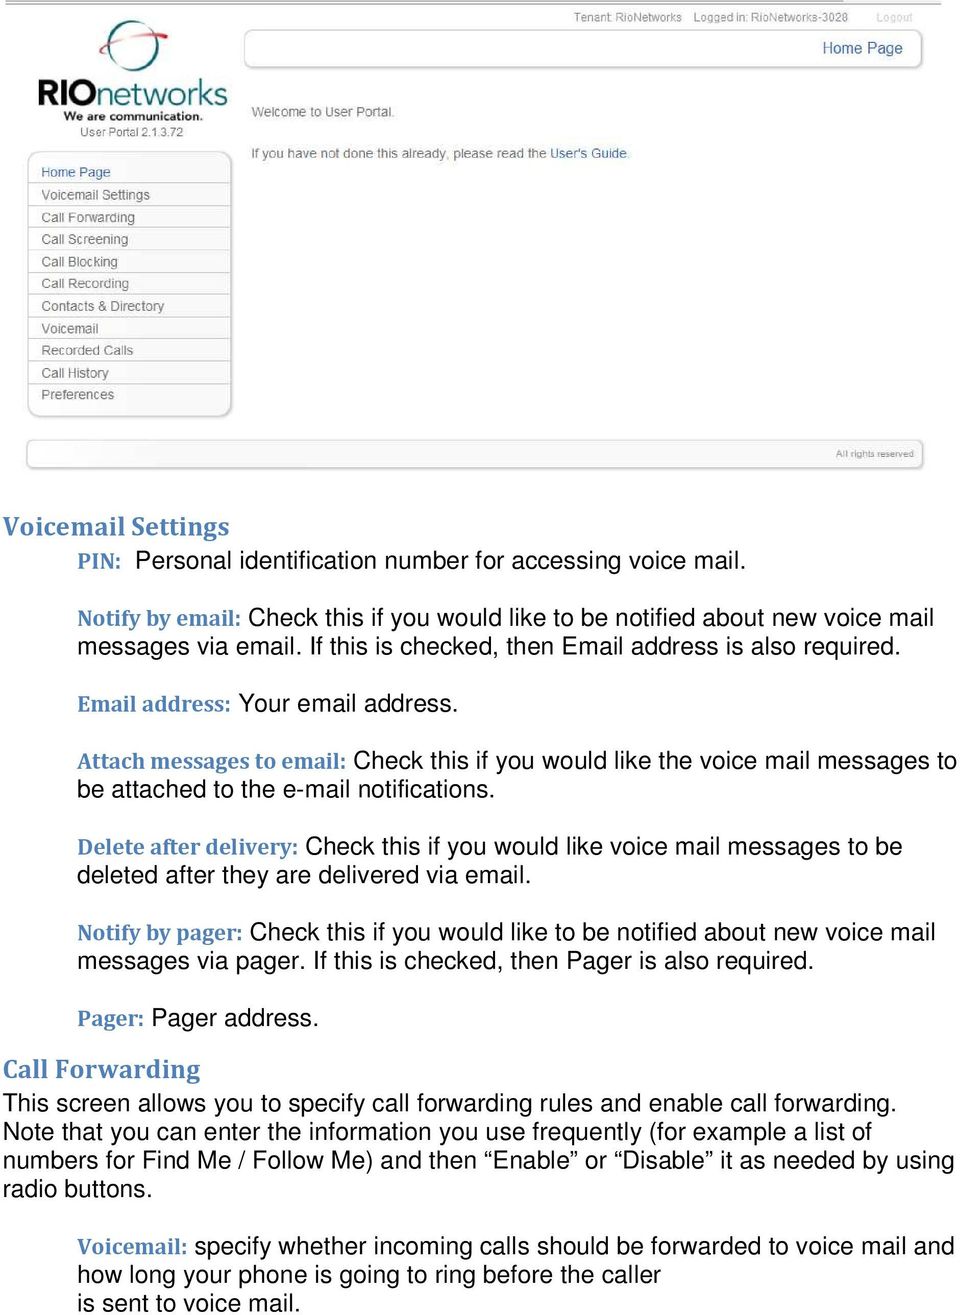 Attach messages to email: Check this if you would like the voice mail messages to be attached to the e-mail notifications.